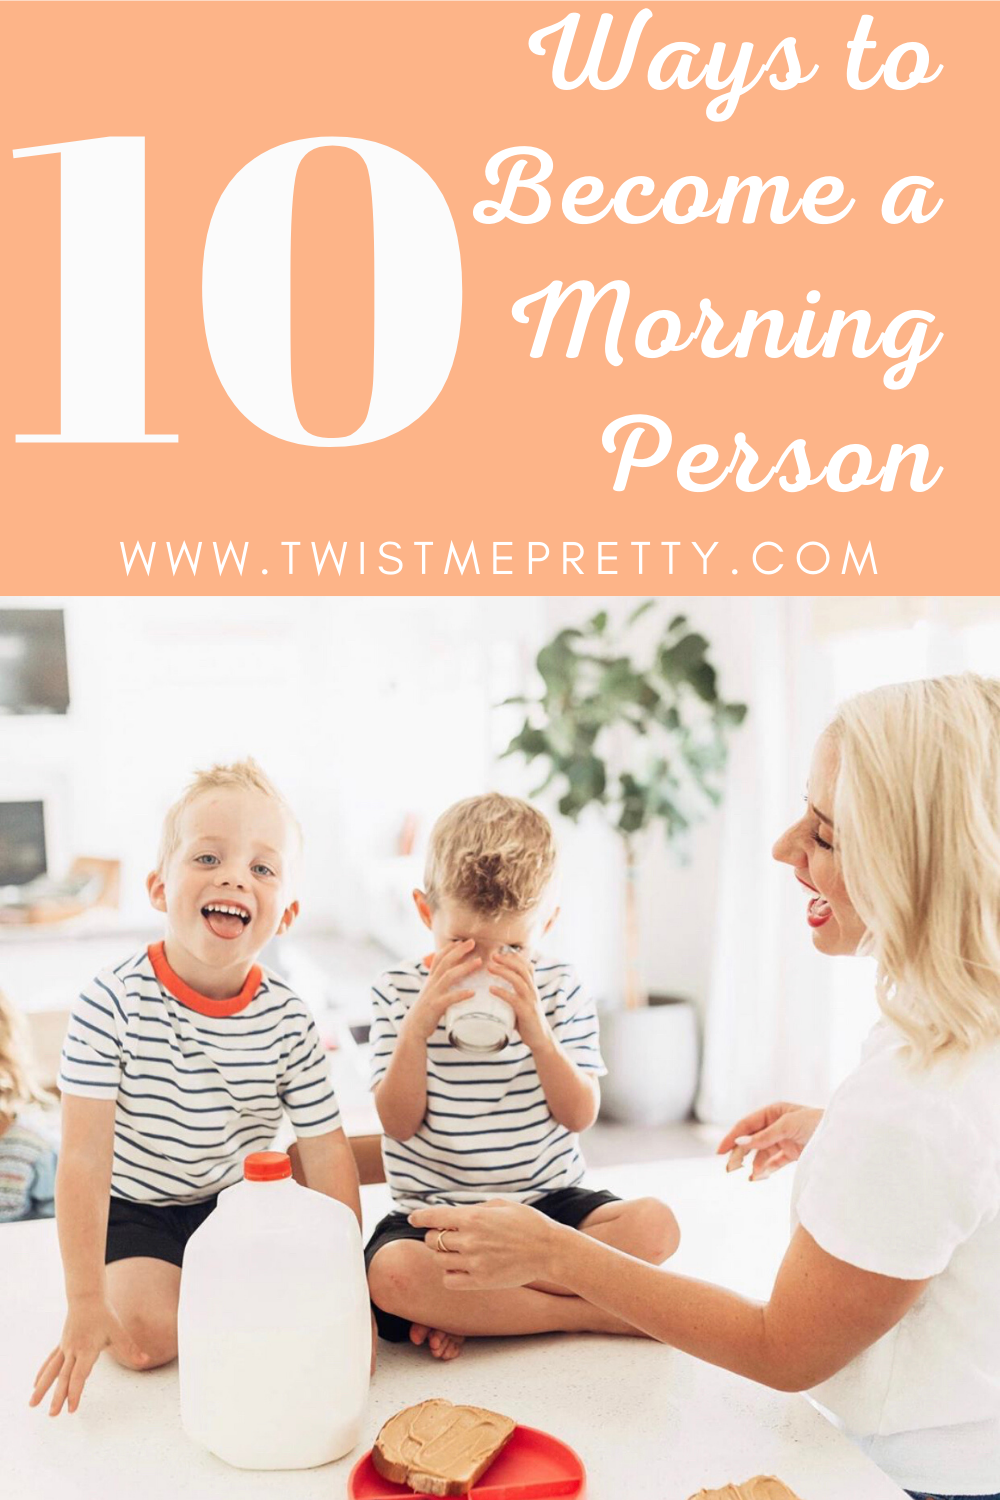 10 ways to become a morning person. www.twistmepretty.com